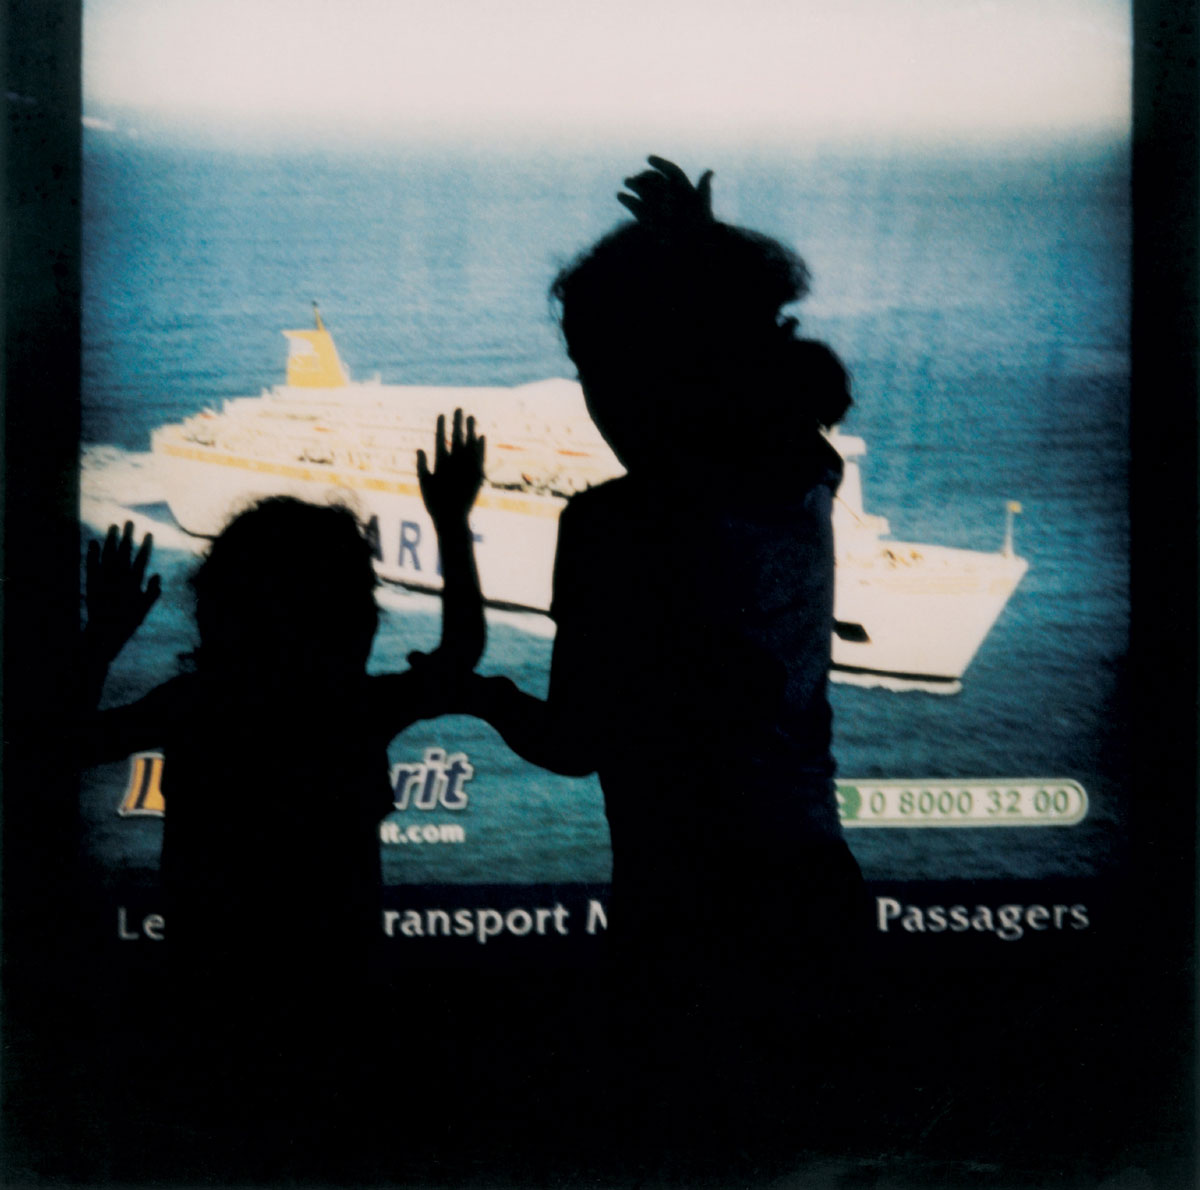 Artist Yto Barrada's 2003 photograph of children in Tangier playing in front of a backlit advertisement titled 